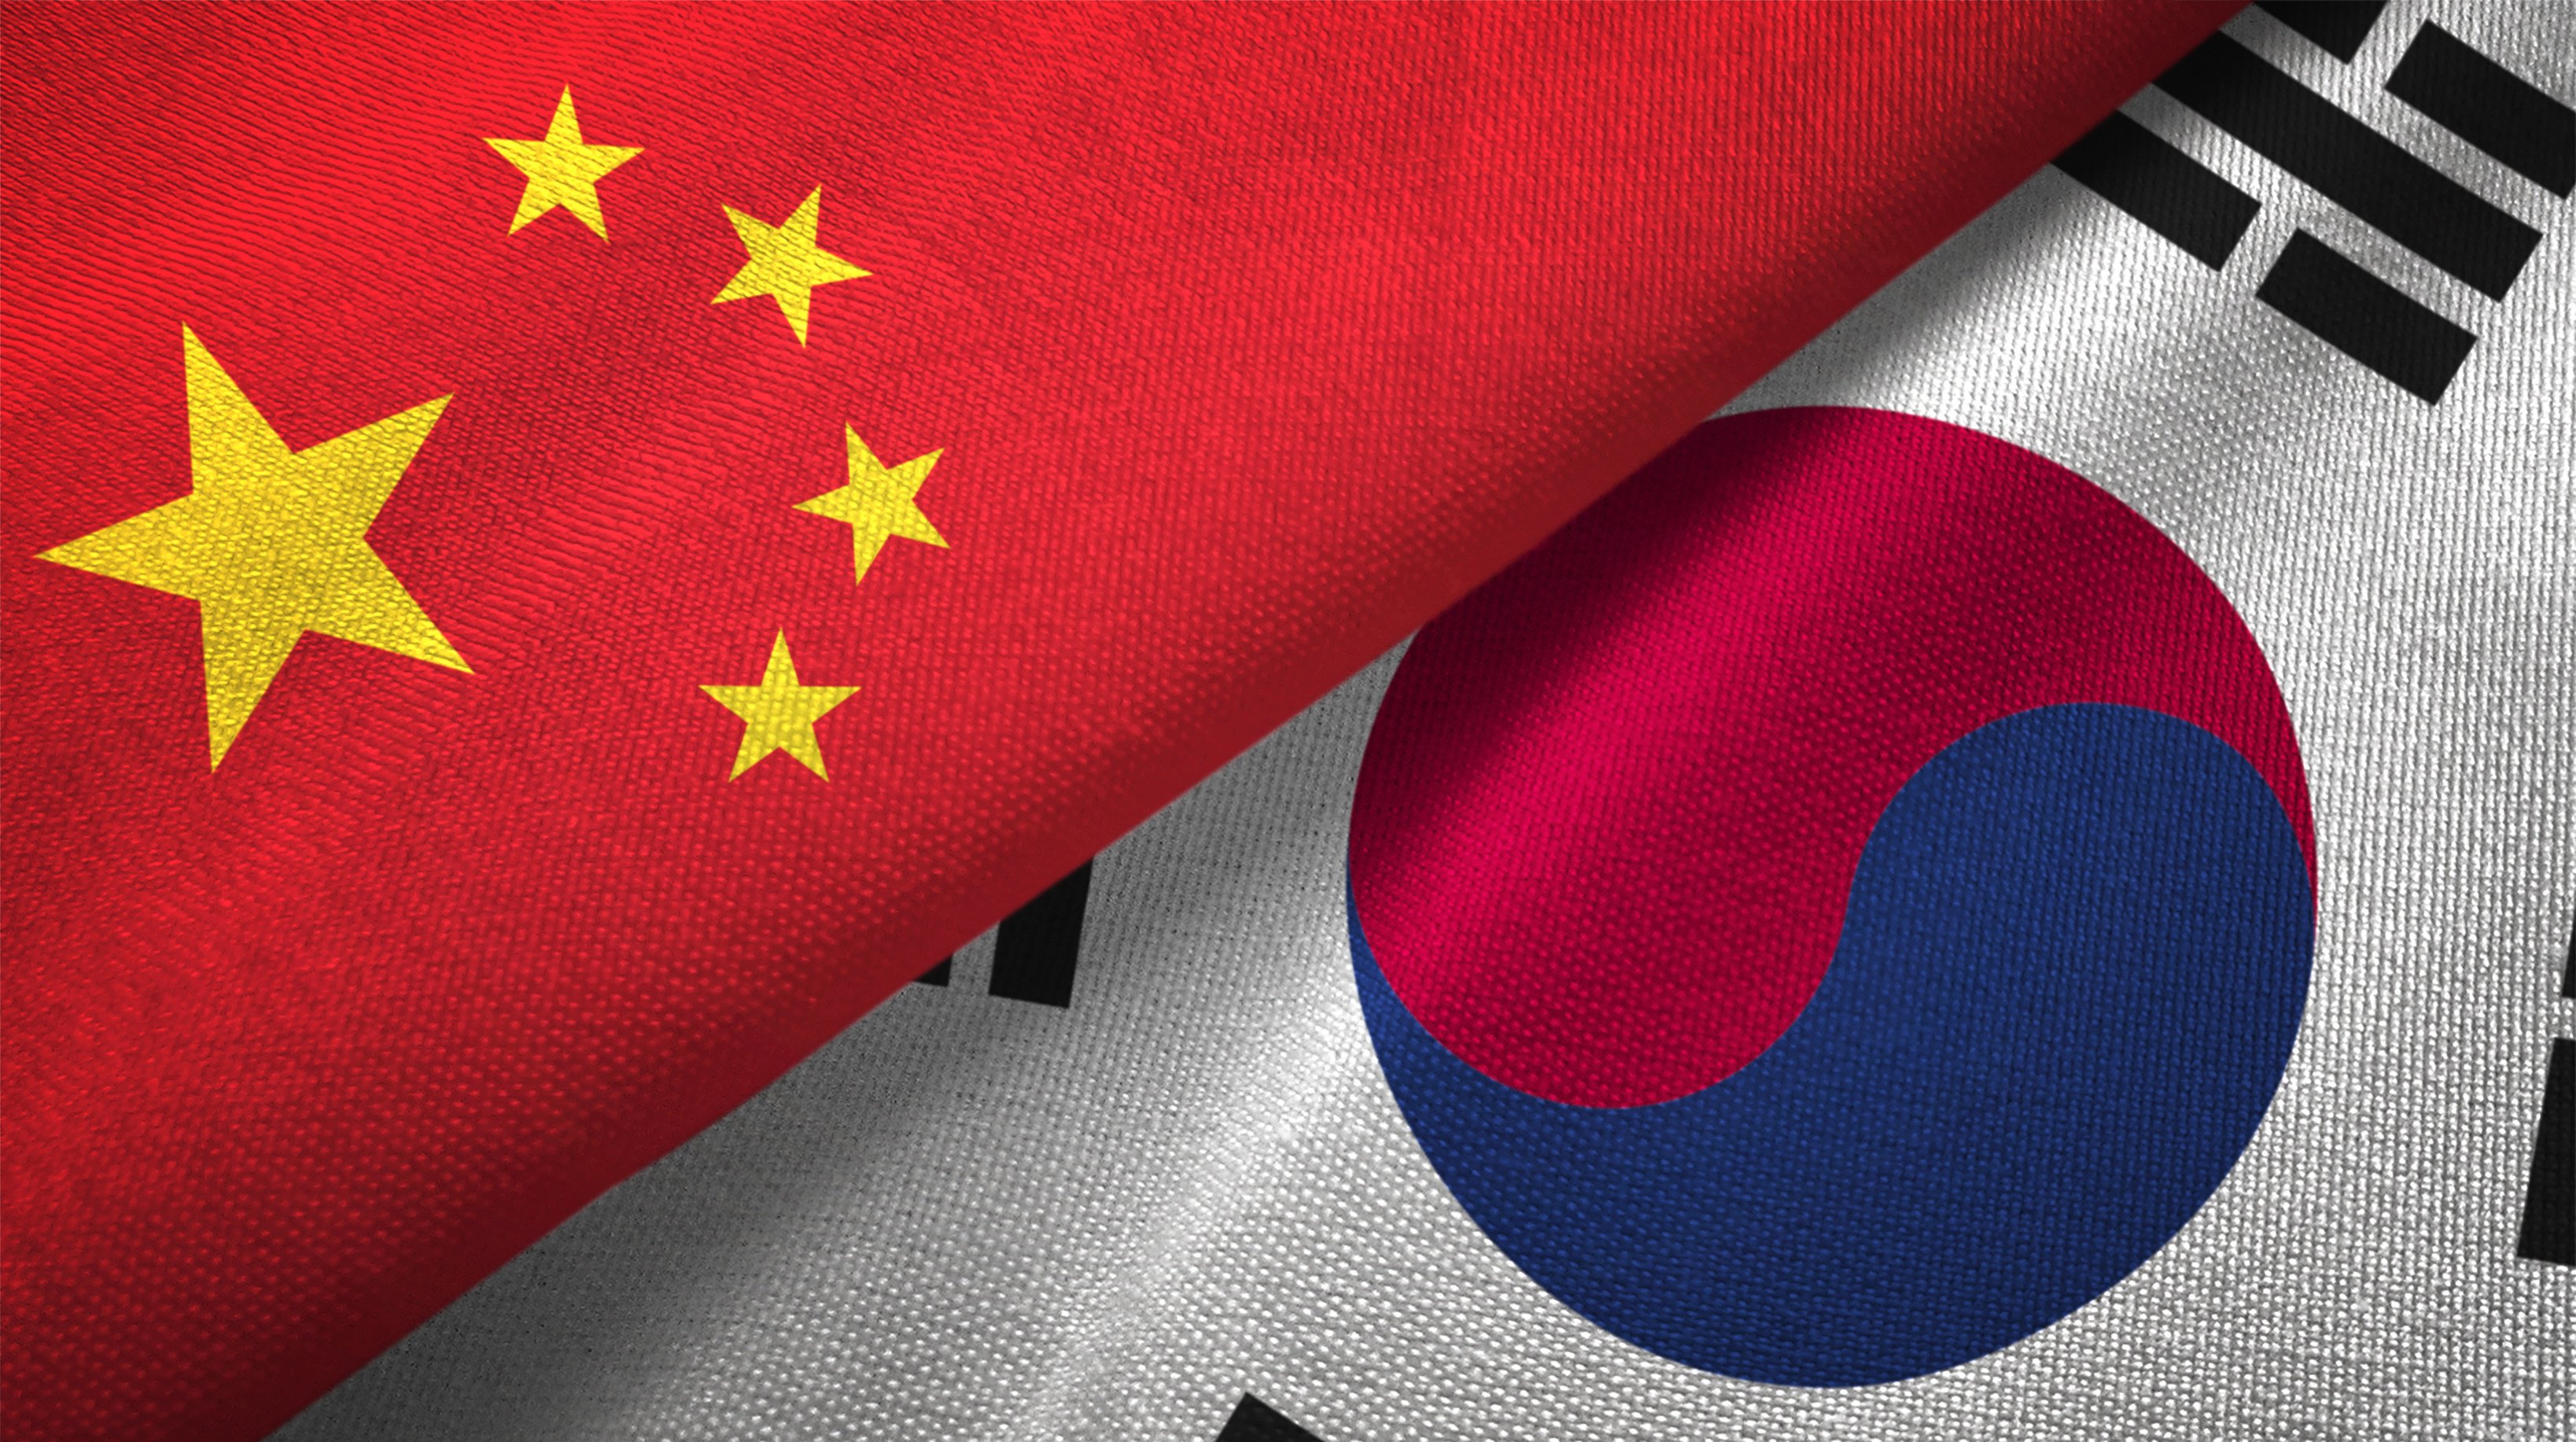 The flags of South Korea and China. Photo: Getty Images/iStockphoto